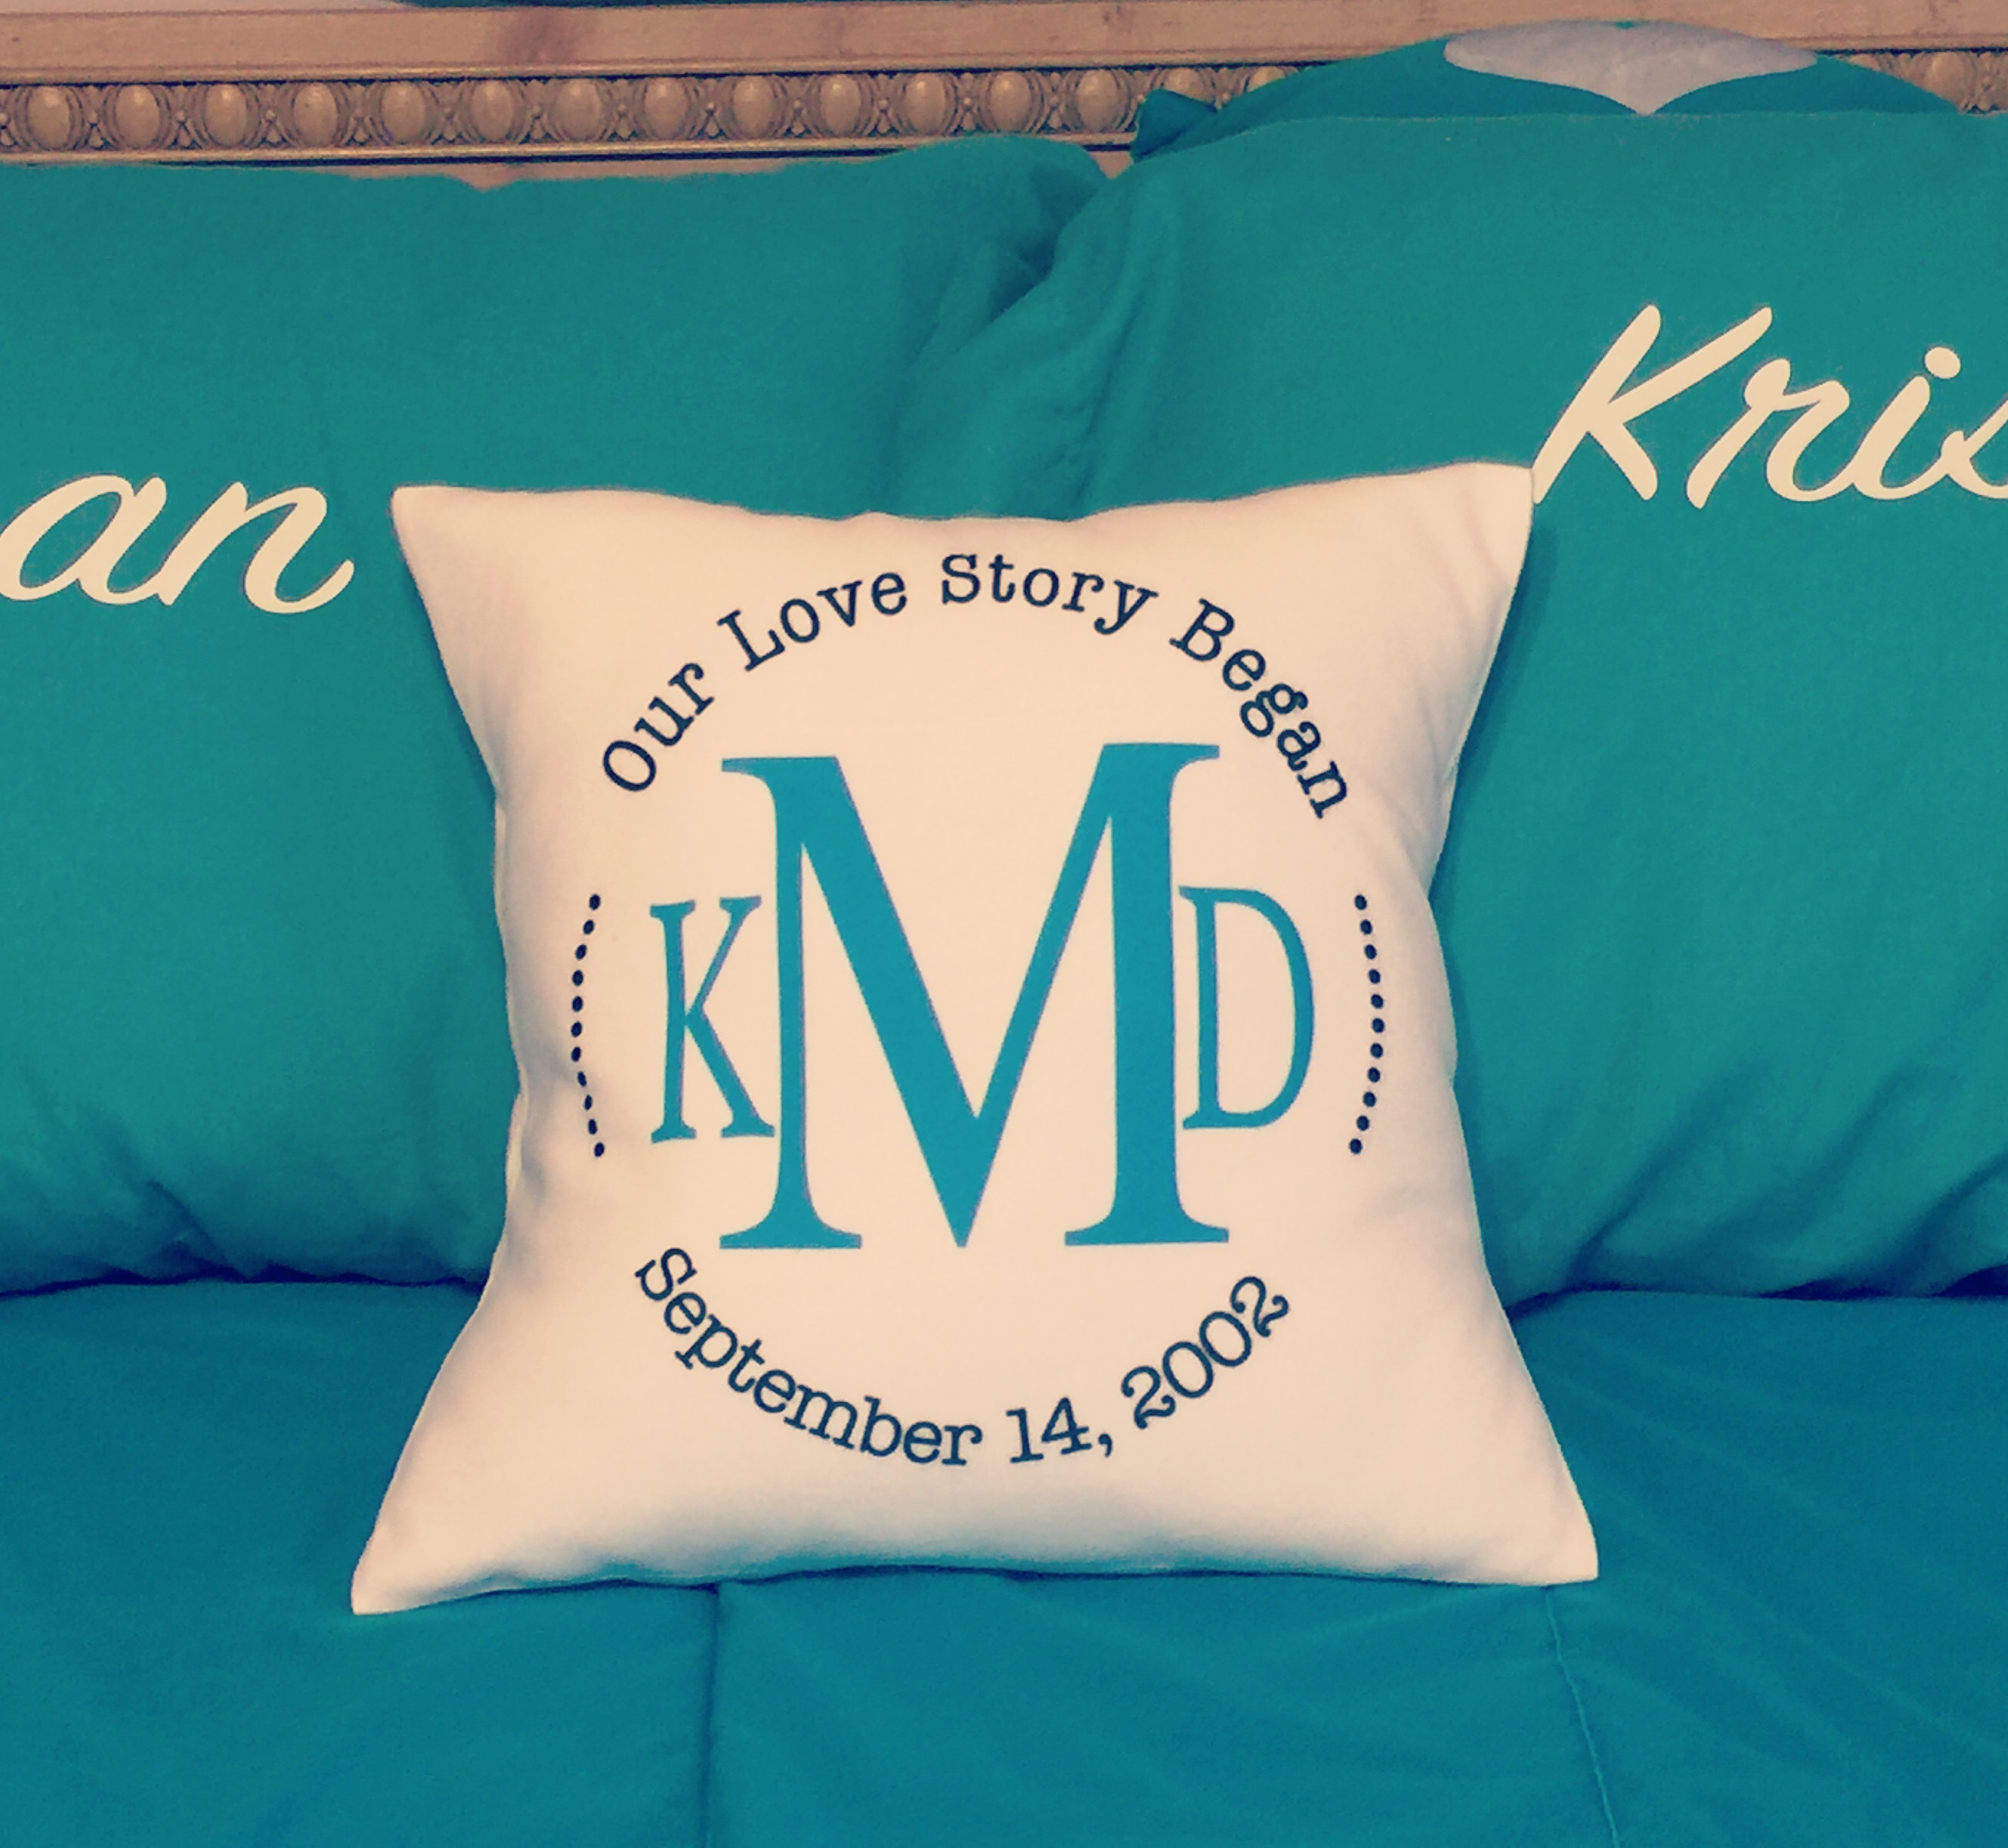 Love Story Pillow Sham made with sublimation printing